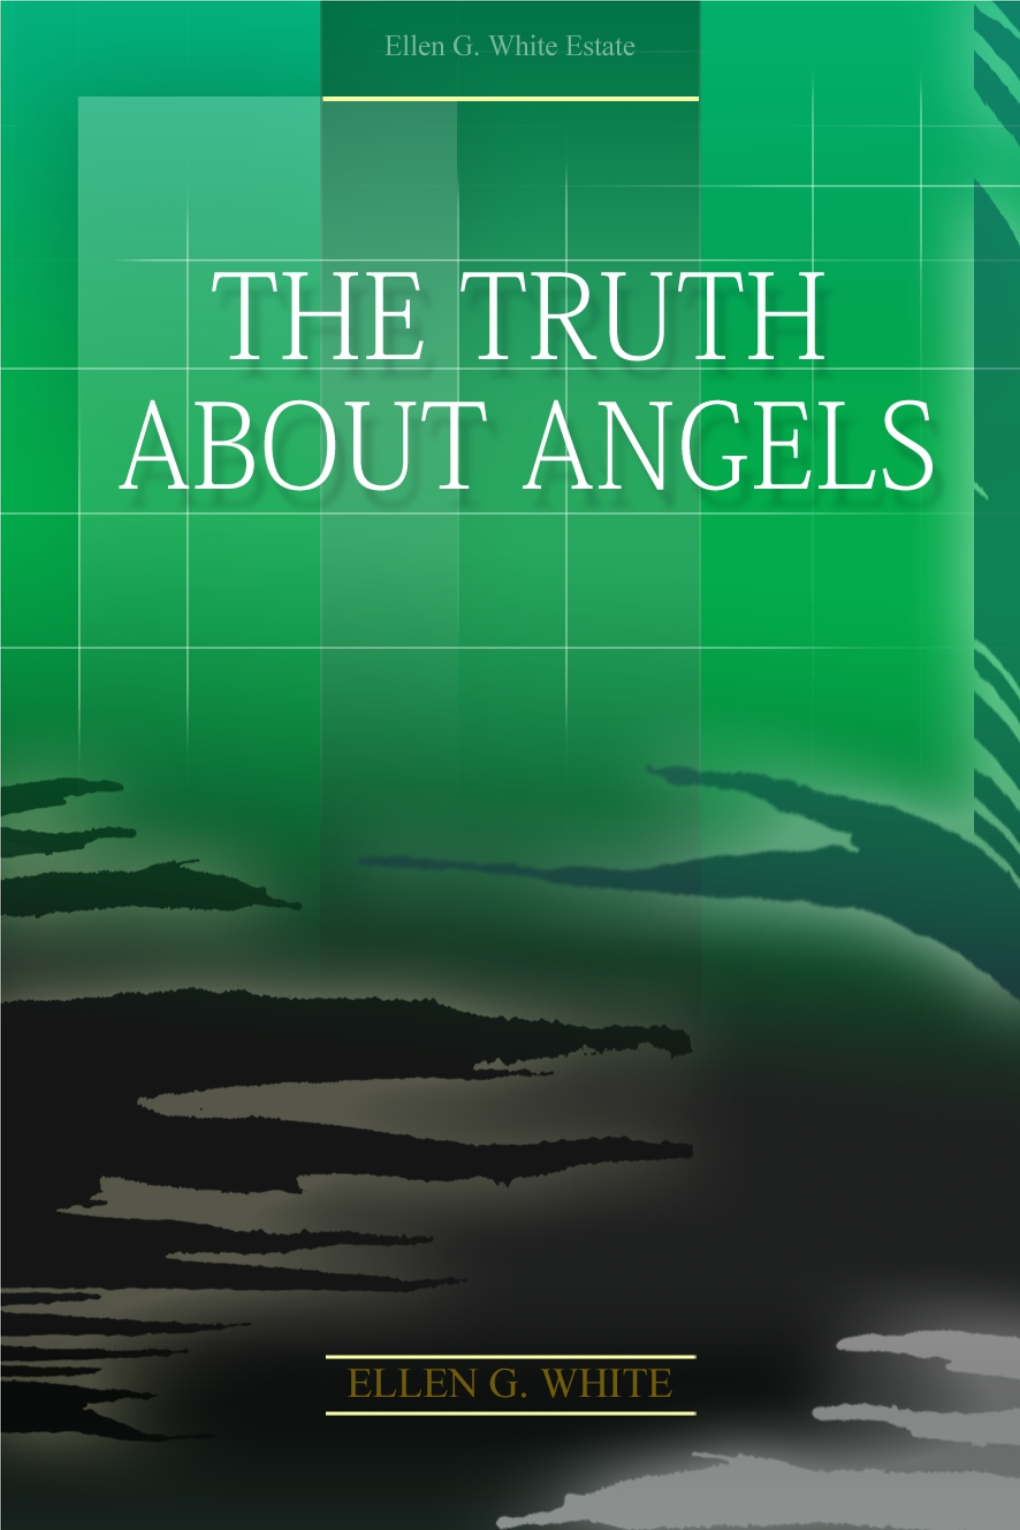 The Truth About Angels (1996)